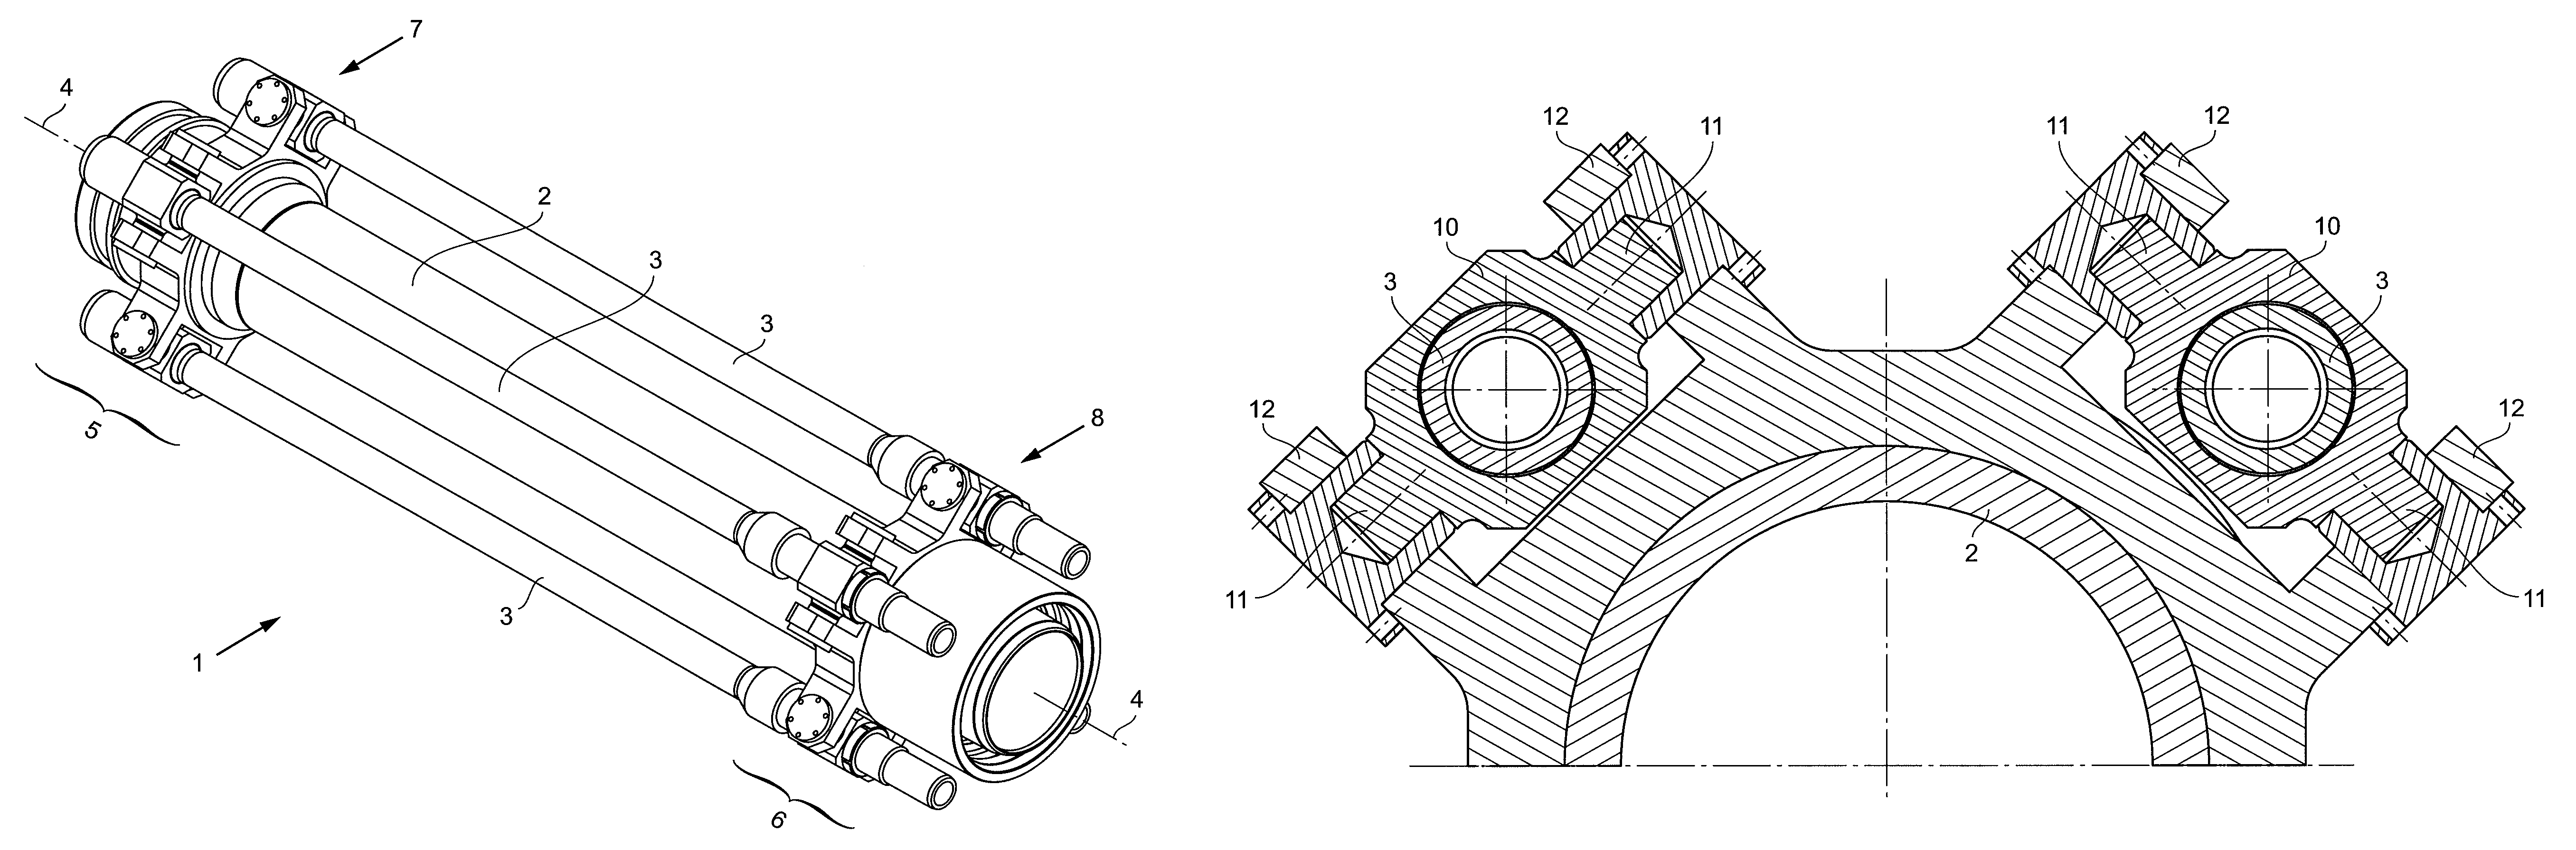 Riser pipe with auxiliary lines mounted on journals